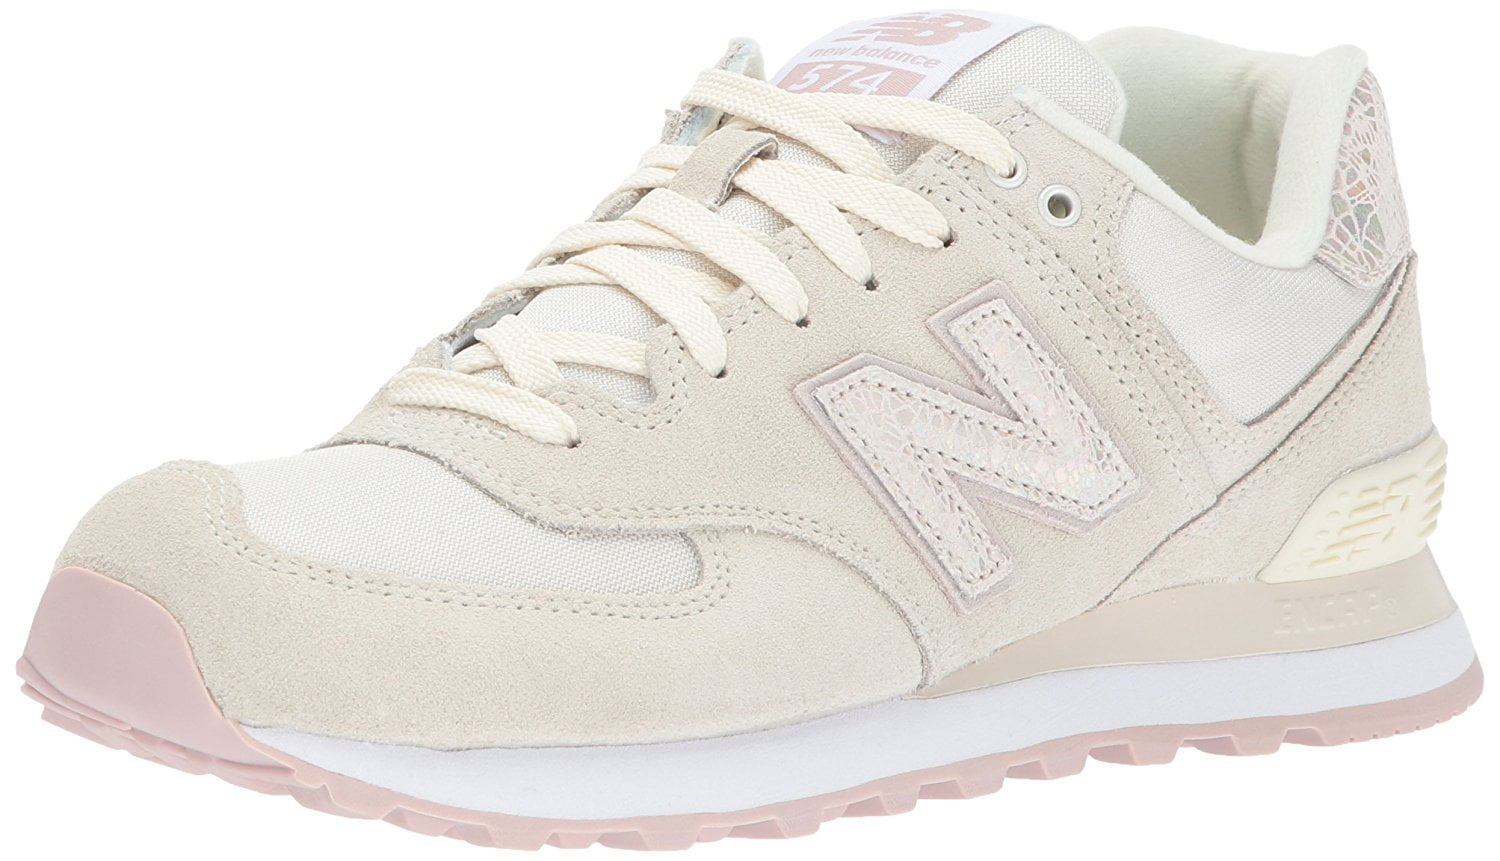 new balance women's 574 shattered pearl casual sneakers from finish line